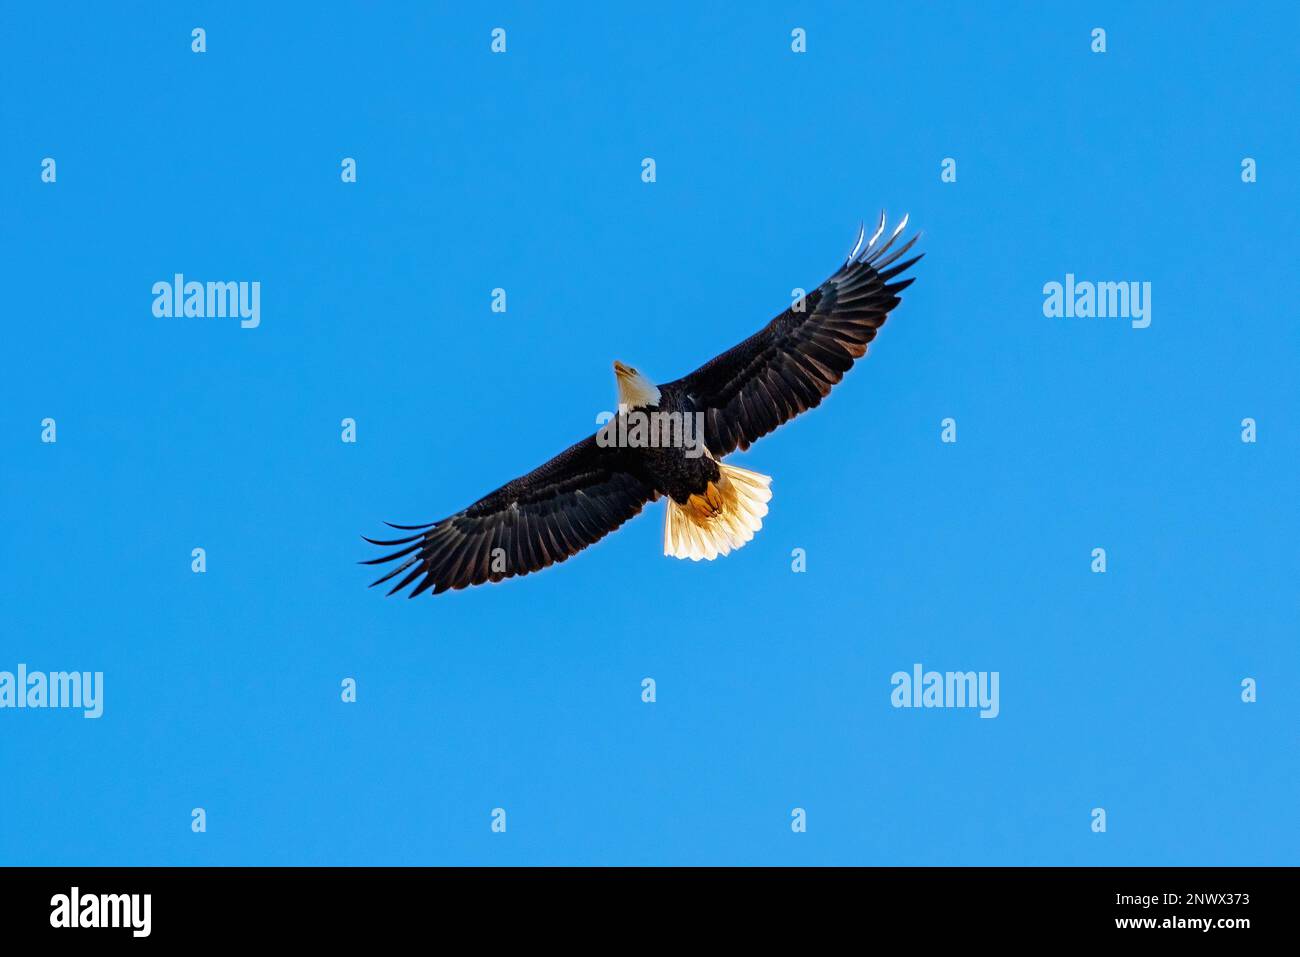 A bald eagle soars over MacDill Air Force Base, Florida, Jan. 17, 2022. The bald eagle has been the national bird of America since 1782, when it was placed with outspread wings on the Great Seal of the United States. Florida has one of the densest concentrations of nesting bald eagles in the lower 48 states, and Tampa Bay provides an abundance of fish for the eagles at MacDill. Stock Photo